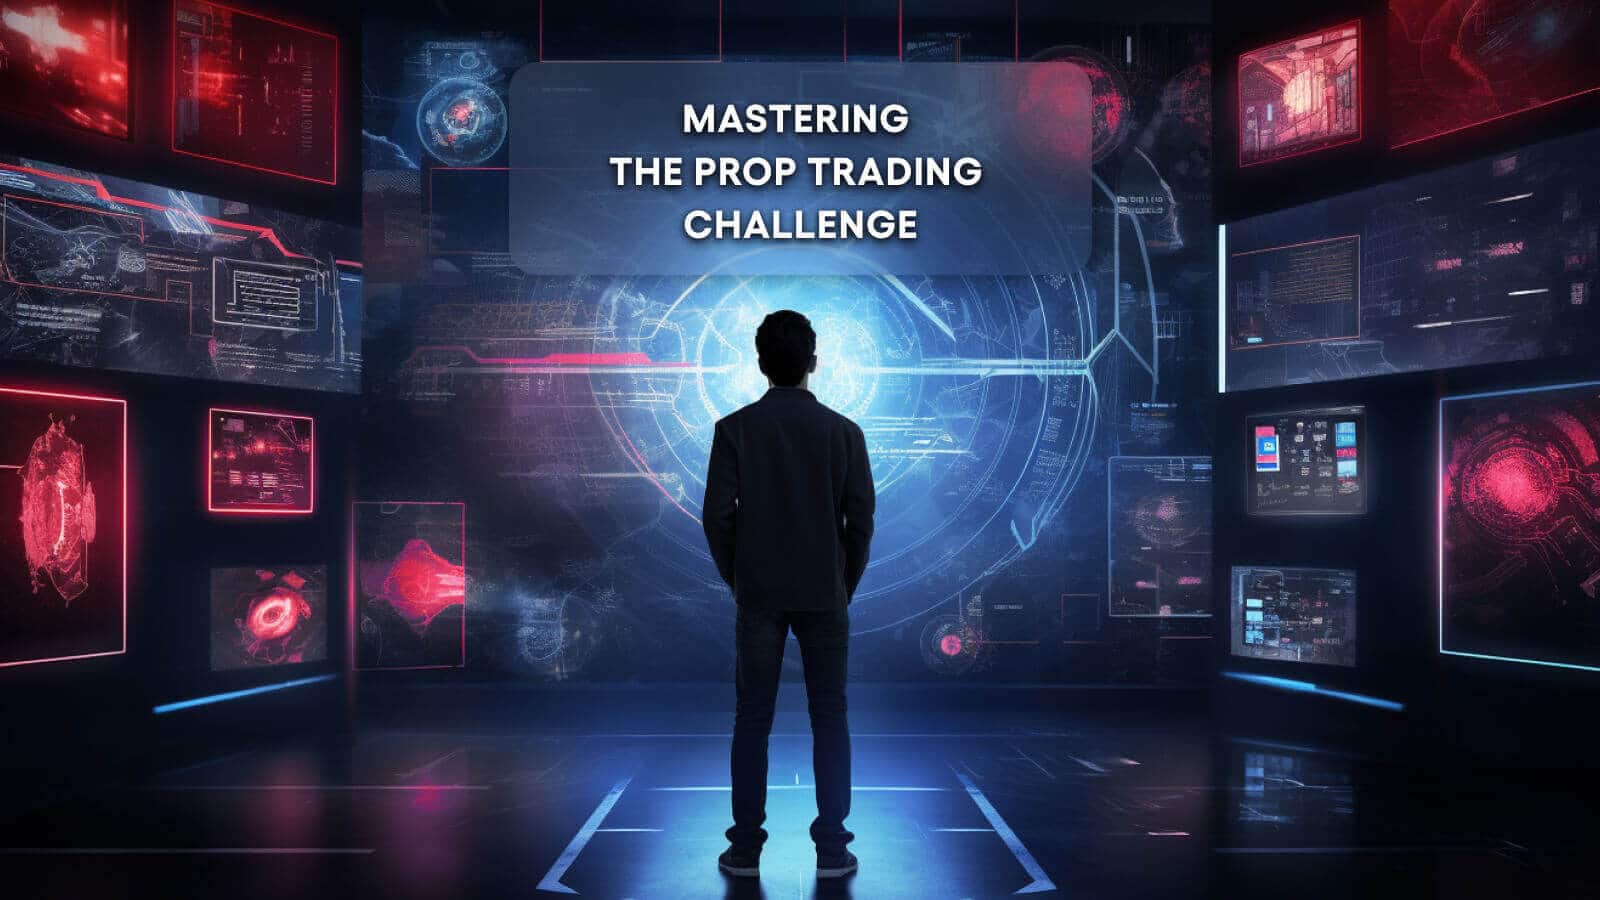 A trader in a futuristic setting looking at charts and undertaking a prop trading challenge